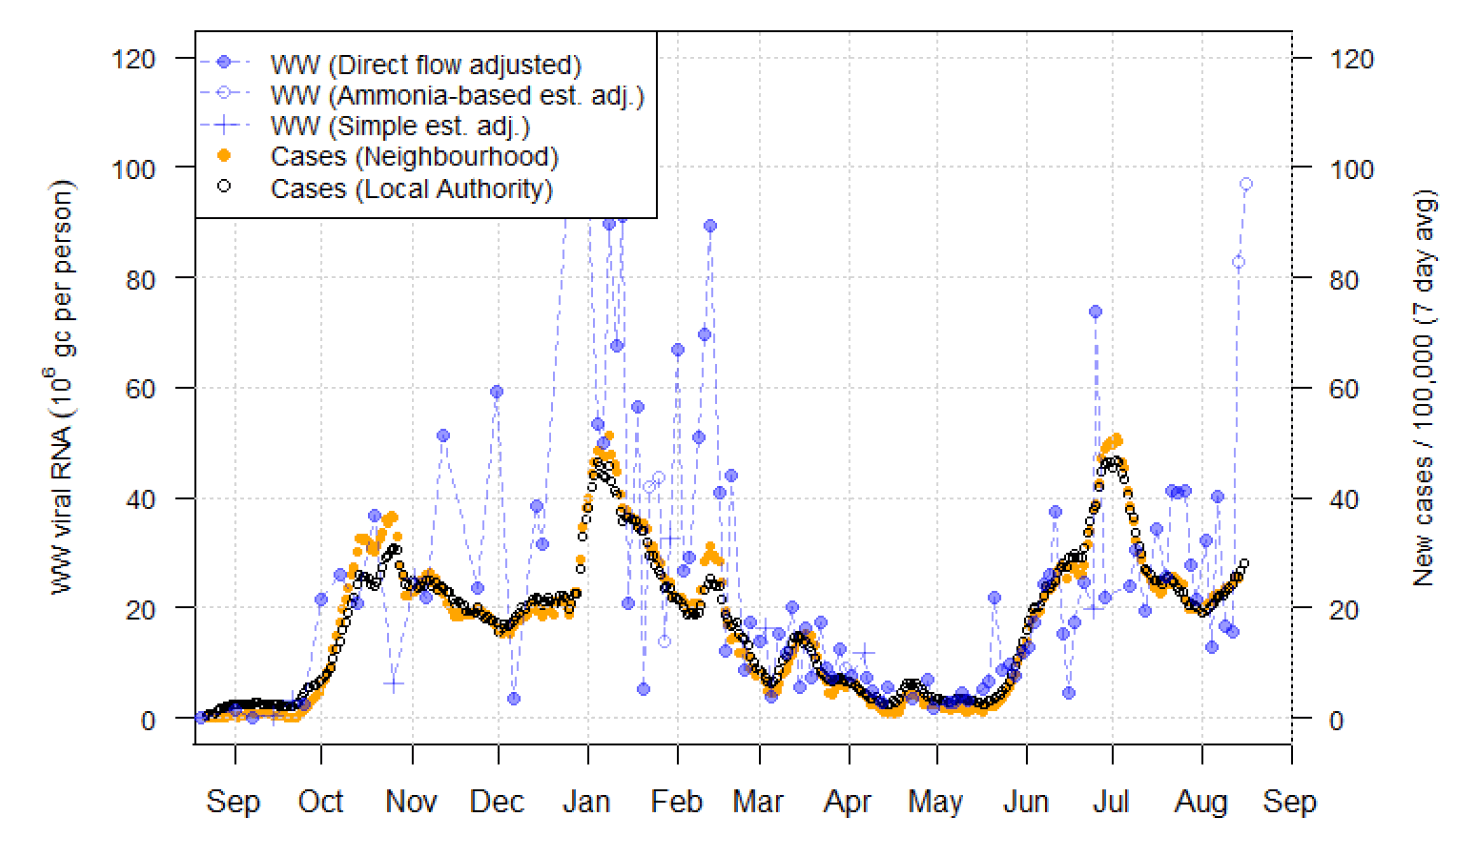 Figure 17. A line chart showing average trends in wastewater Covid-19 and daily case rates for Meadowhead in South Ayrshire.